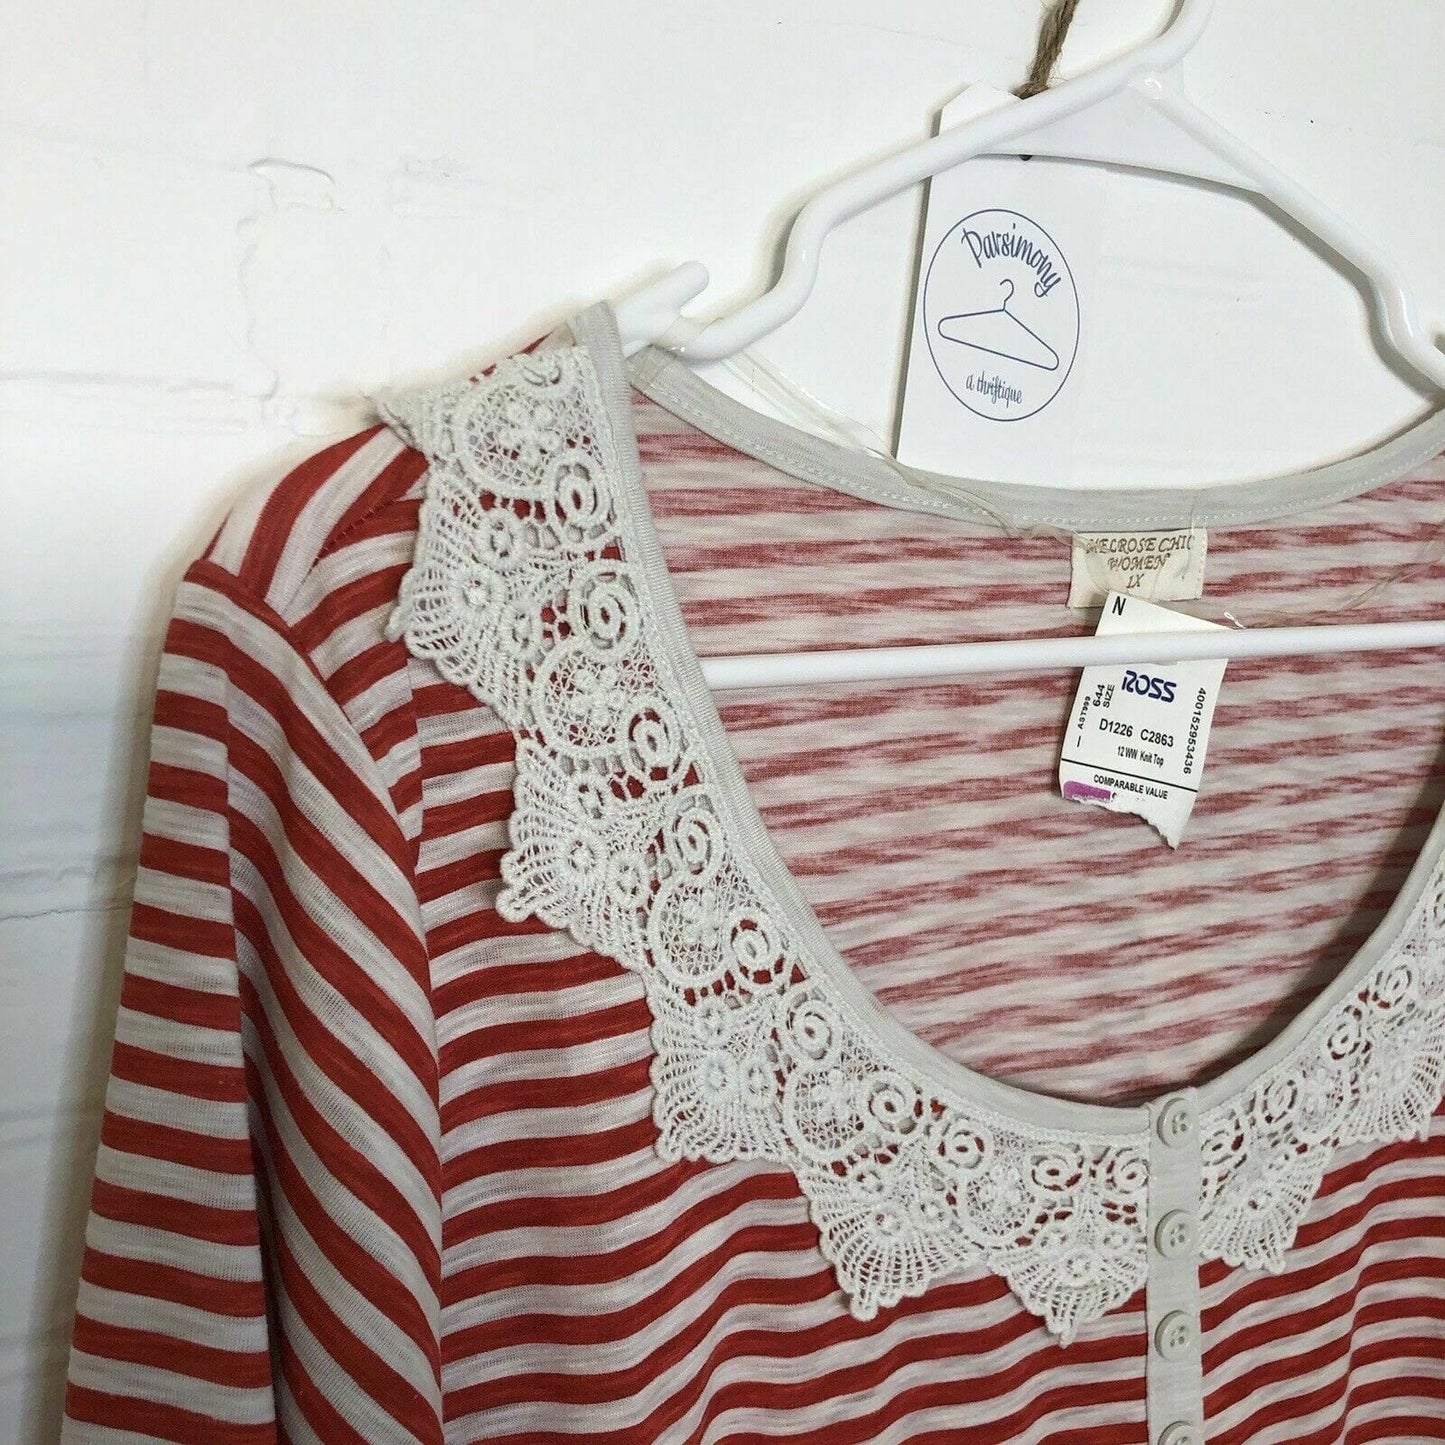 Melrose Chic Womens Size 1X Red White Striped Crocheted Collar Blouse NWT